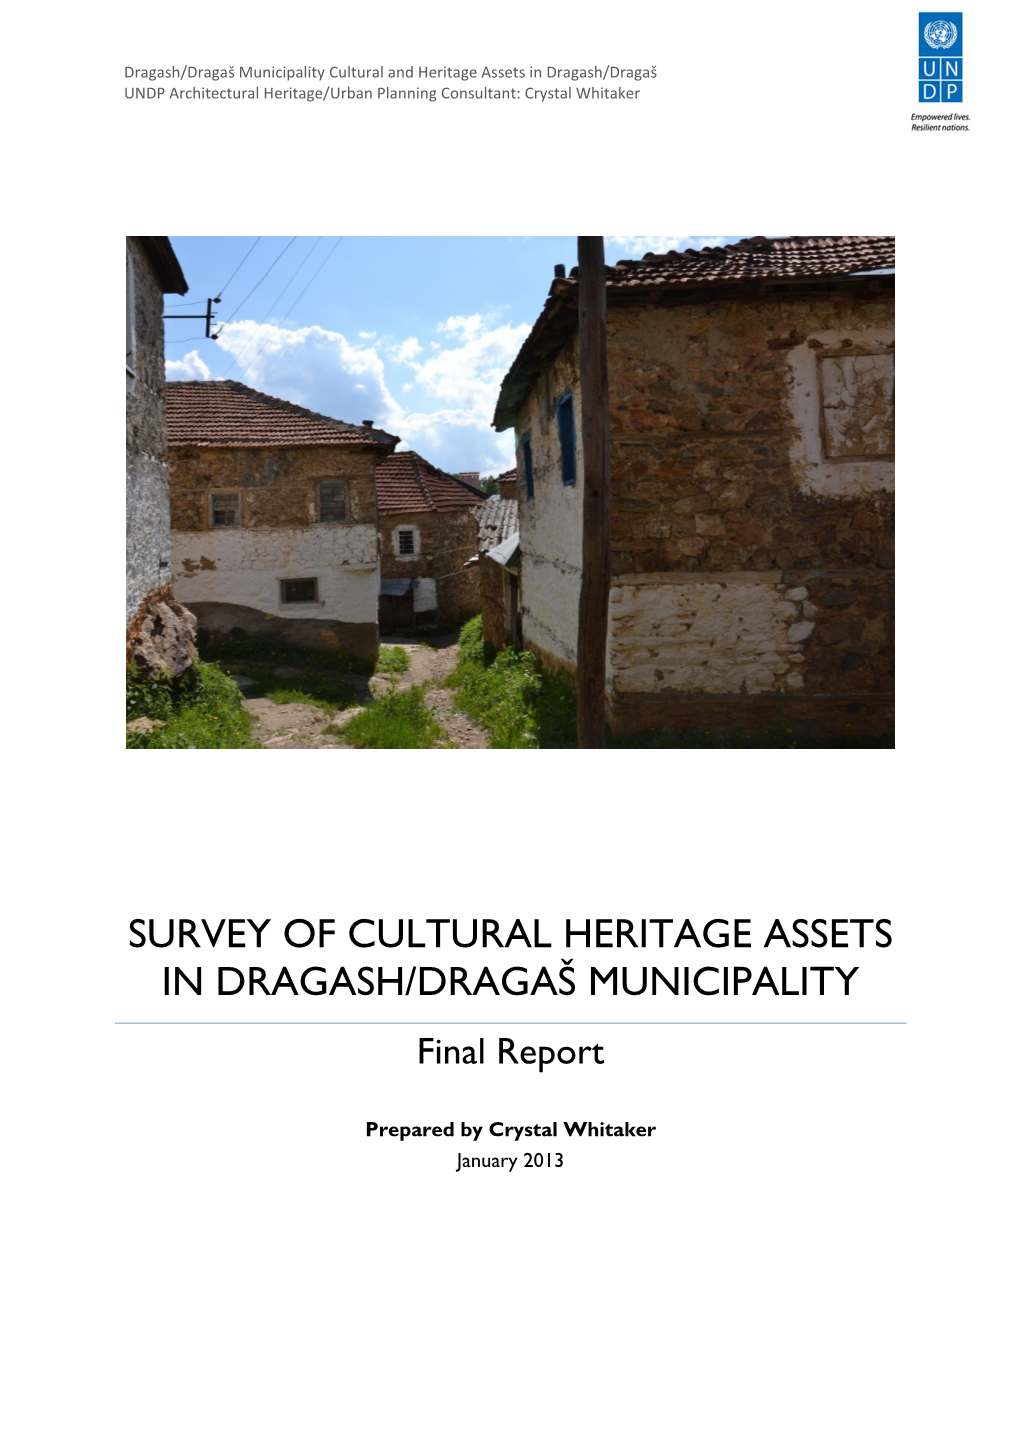 SURVEY of CULTURAL HERITAGE ASSETS in DRAGASH/DRAGAŠ MUNICIPALITY Final Report